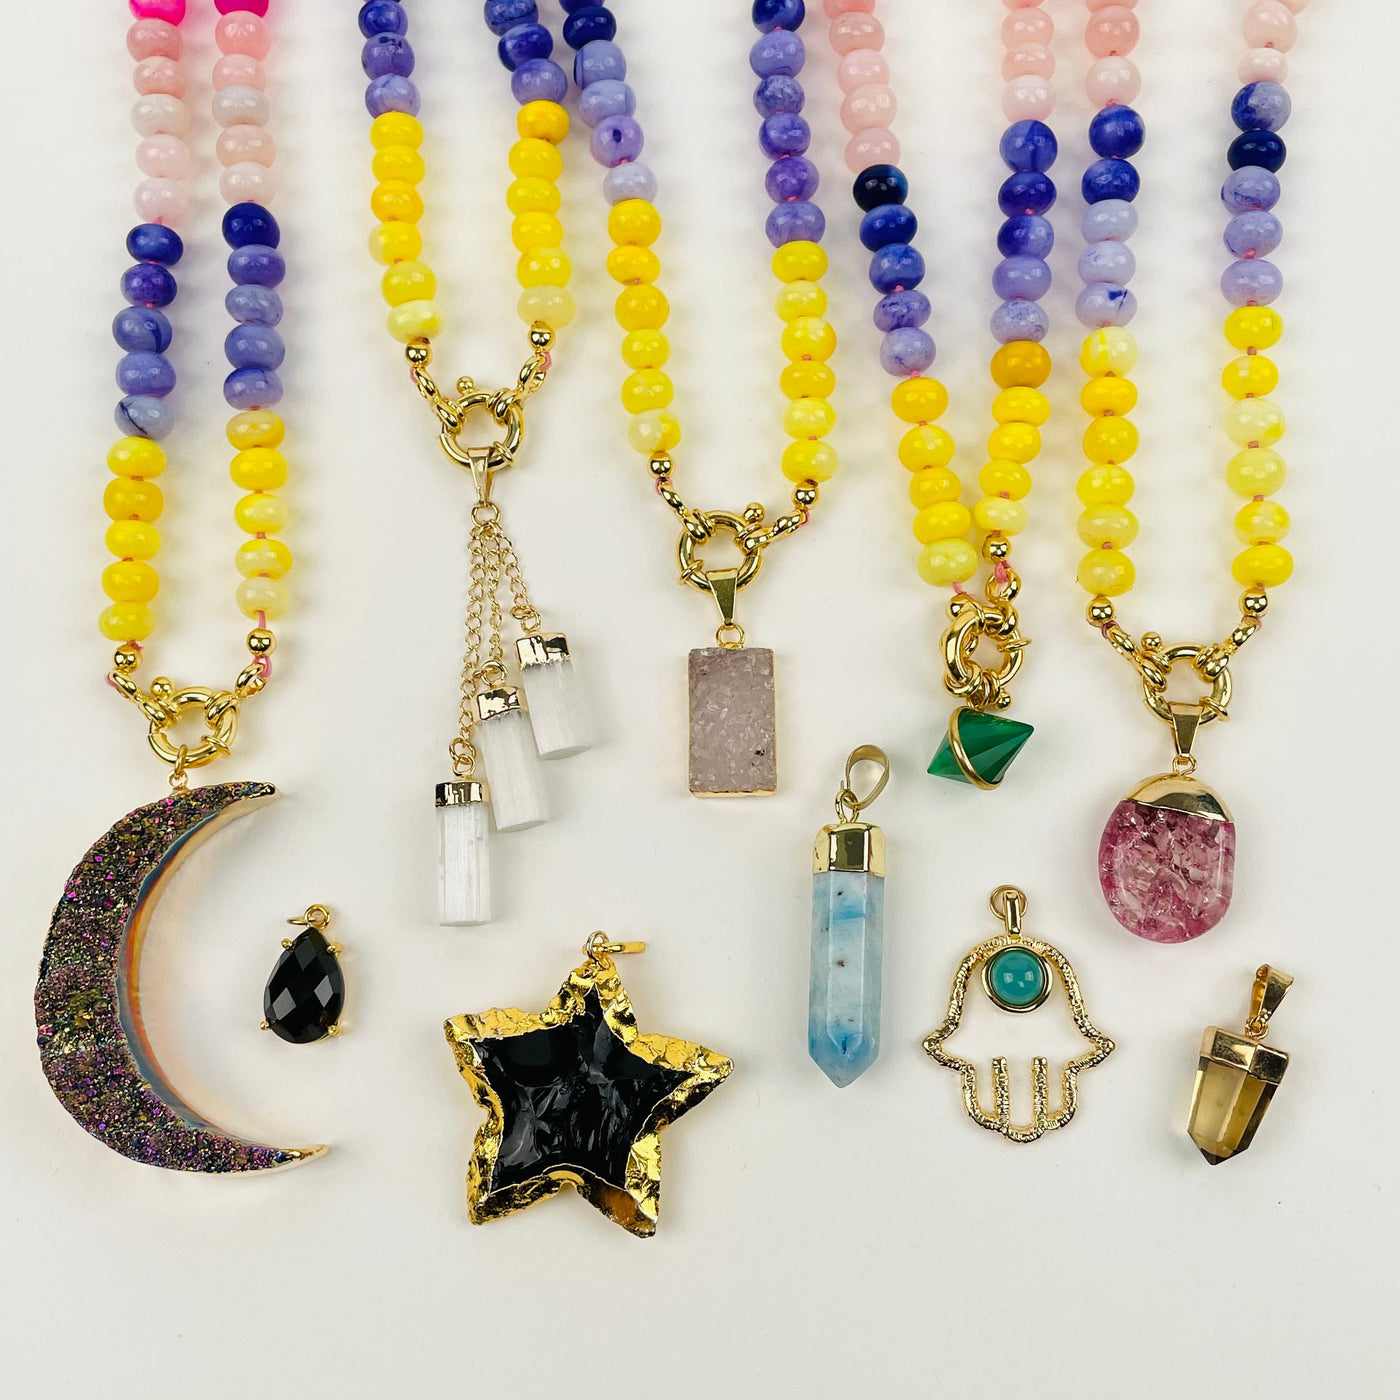 necklaces displayed with pendant charms 